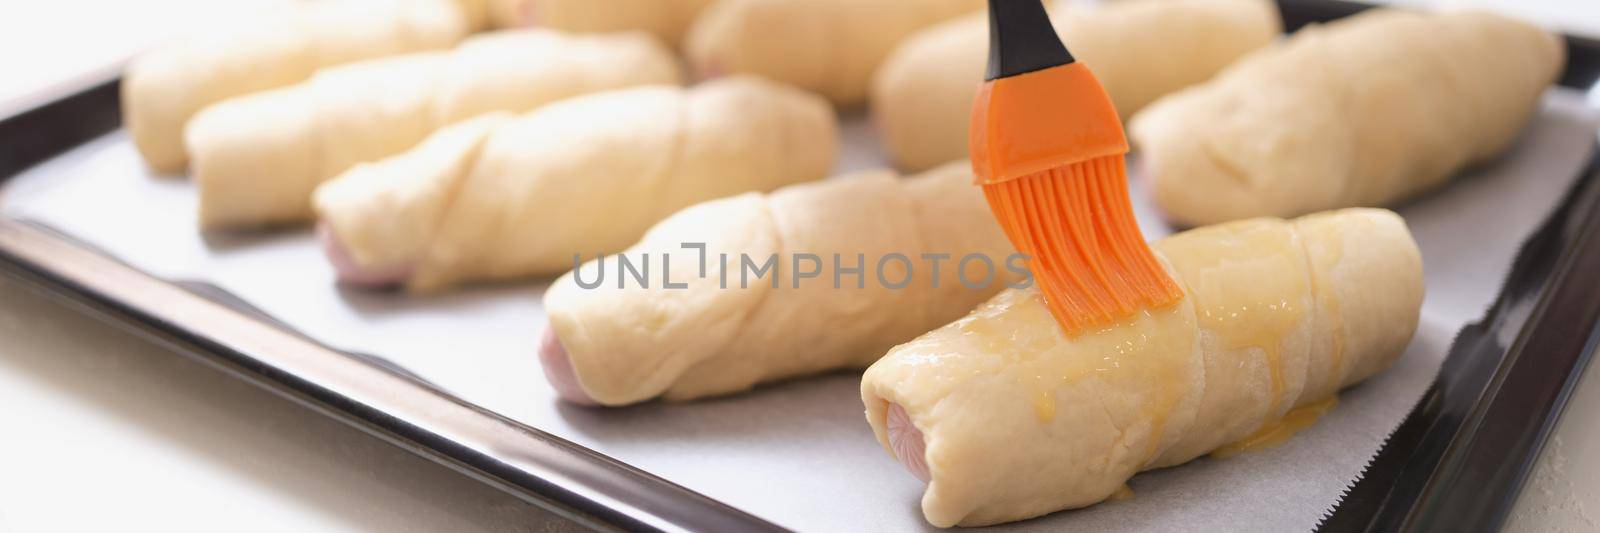 A woman before baking with a brush lubricates dough products, close-up. Delicious homemade cakes, family meal preparation